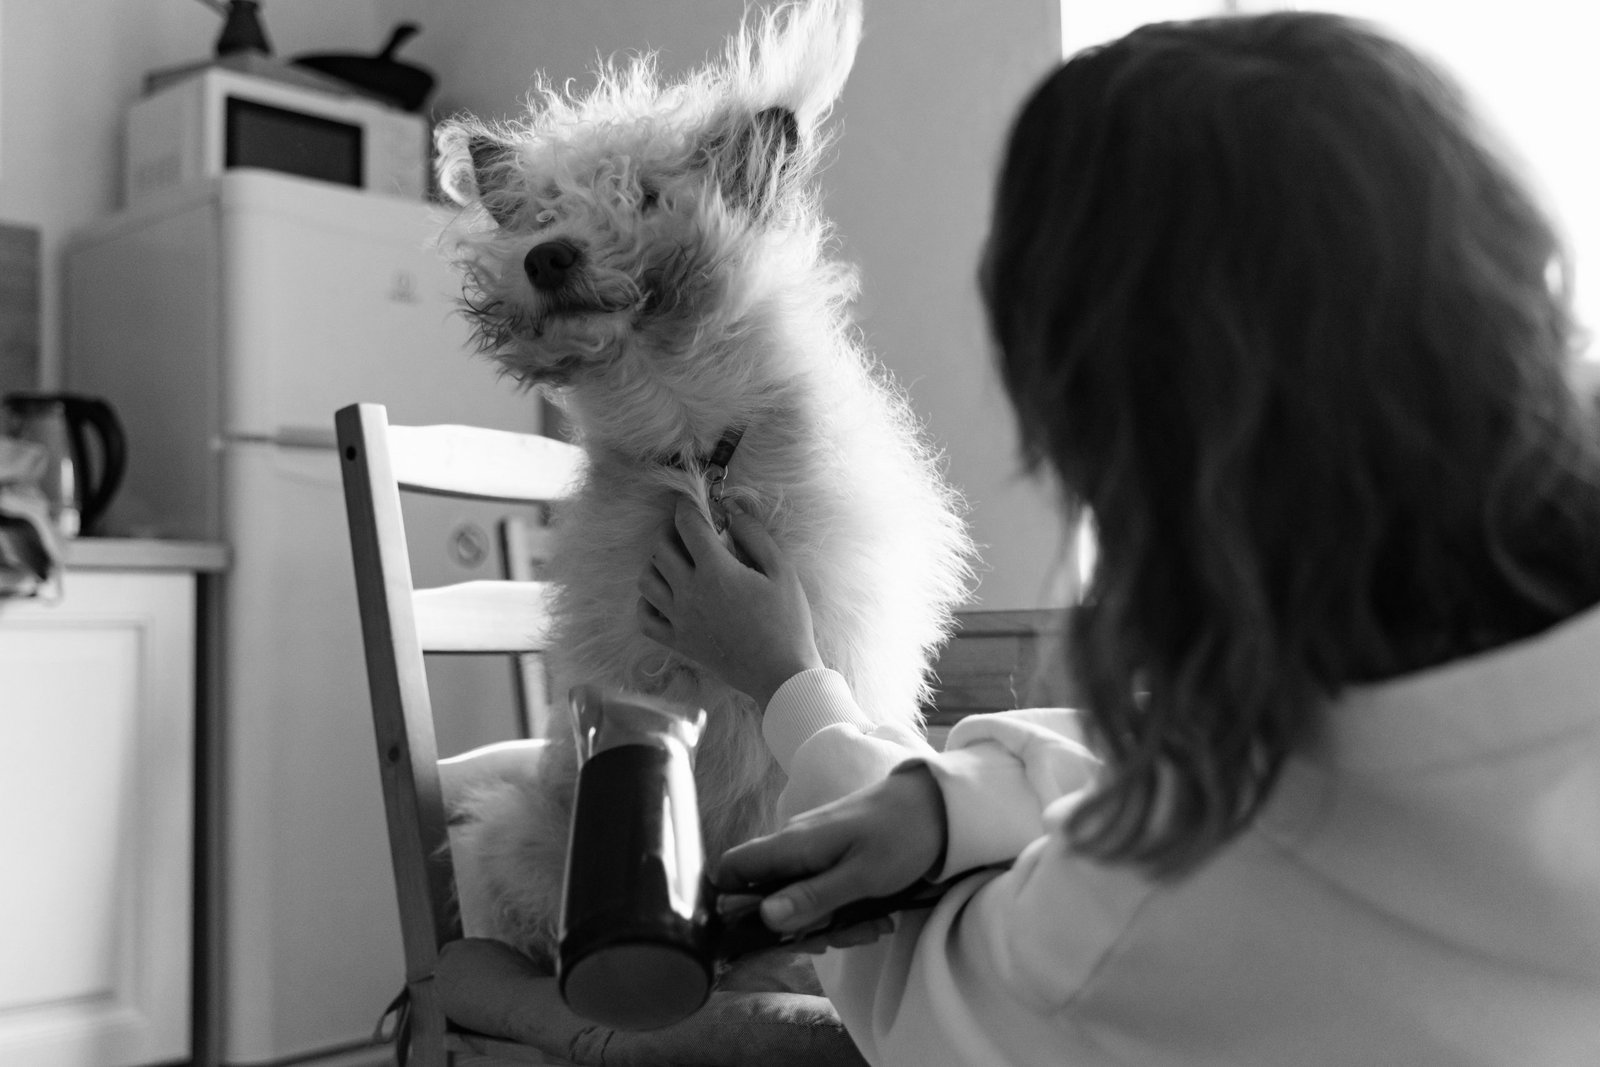 Woman blow-drying her dog's fur while dog is platformed on a chair.